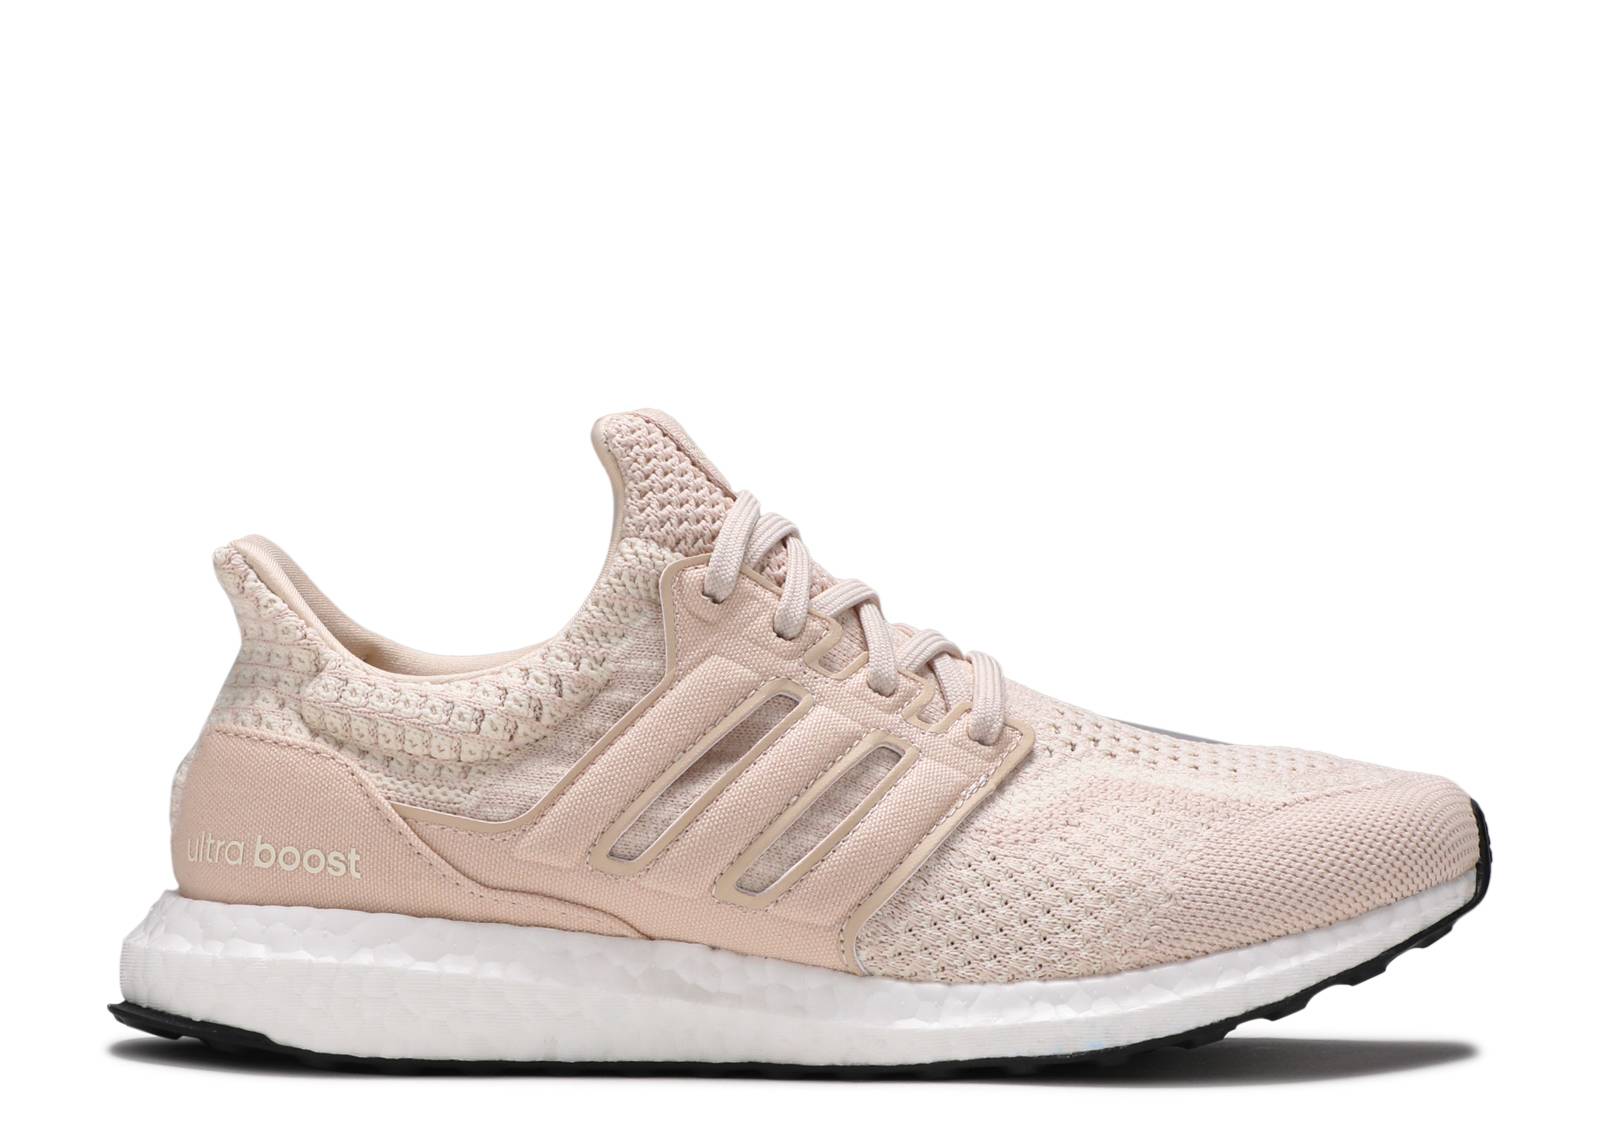 Wmns UltraBoost 5.0 DNA 'Halo Ivory'